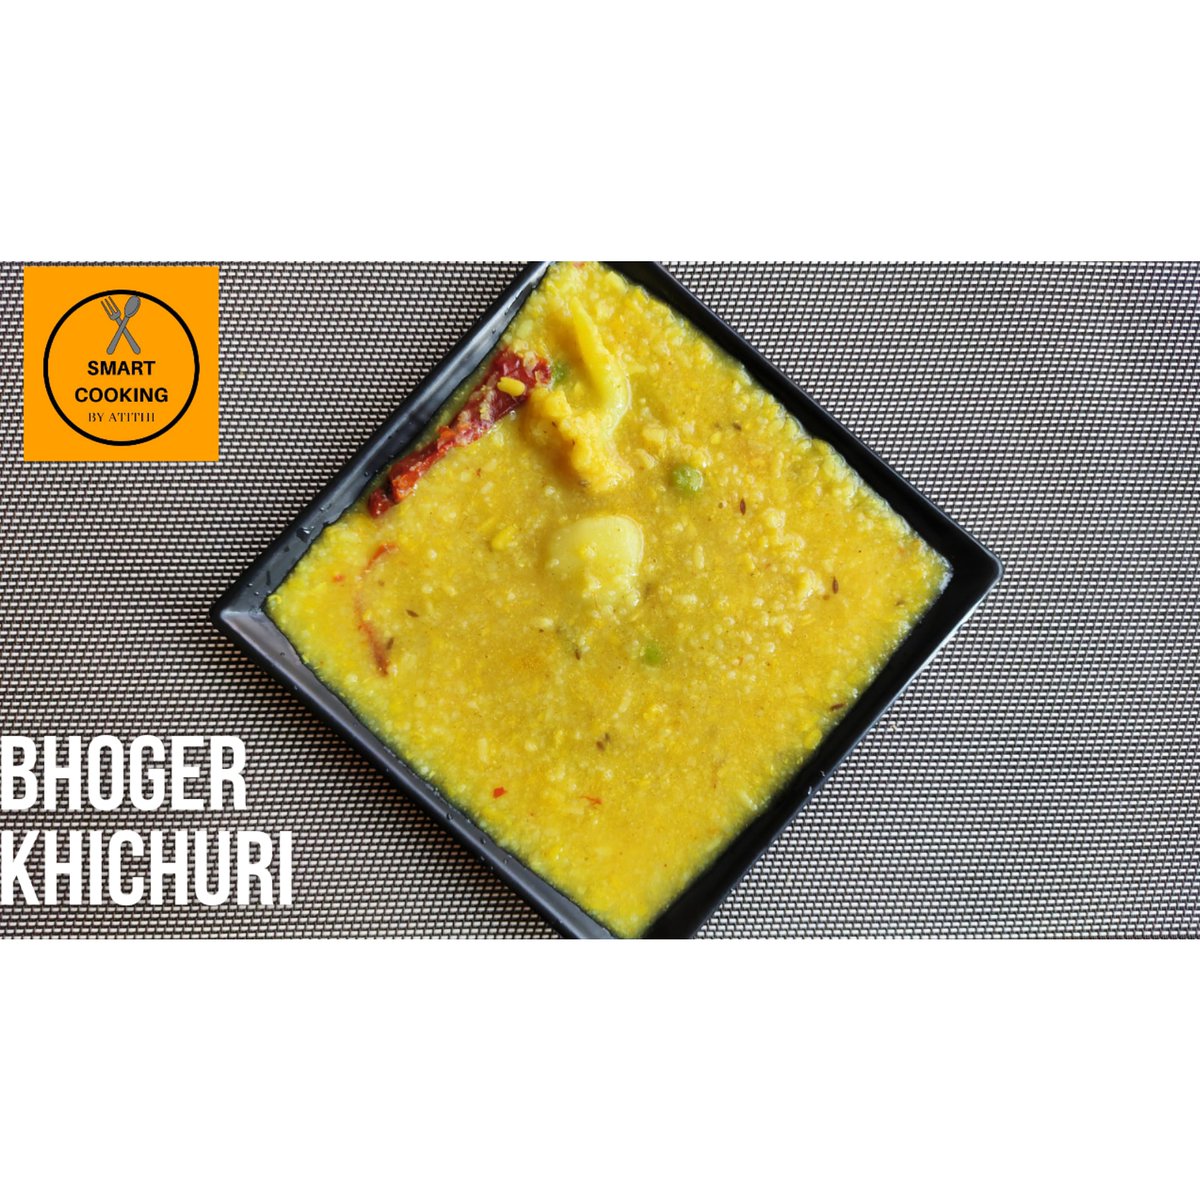 Bhoger Khichuri
To know the complete recipe click on the below YouTube link
youtu.be/CoarKUcOBUQ
#bhogerkhichuri #khichuri #khichidi #Recipe #food #foodies #foodie #vegetables #vegrecipes